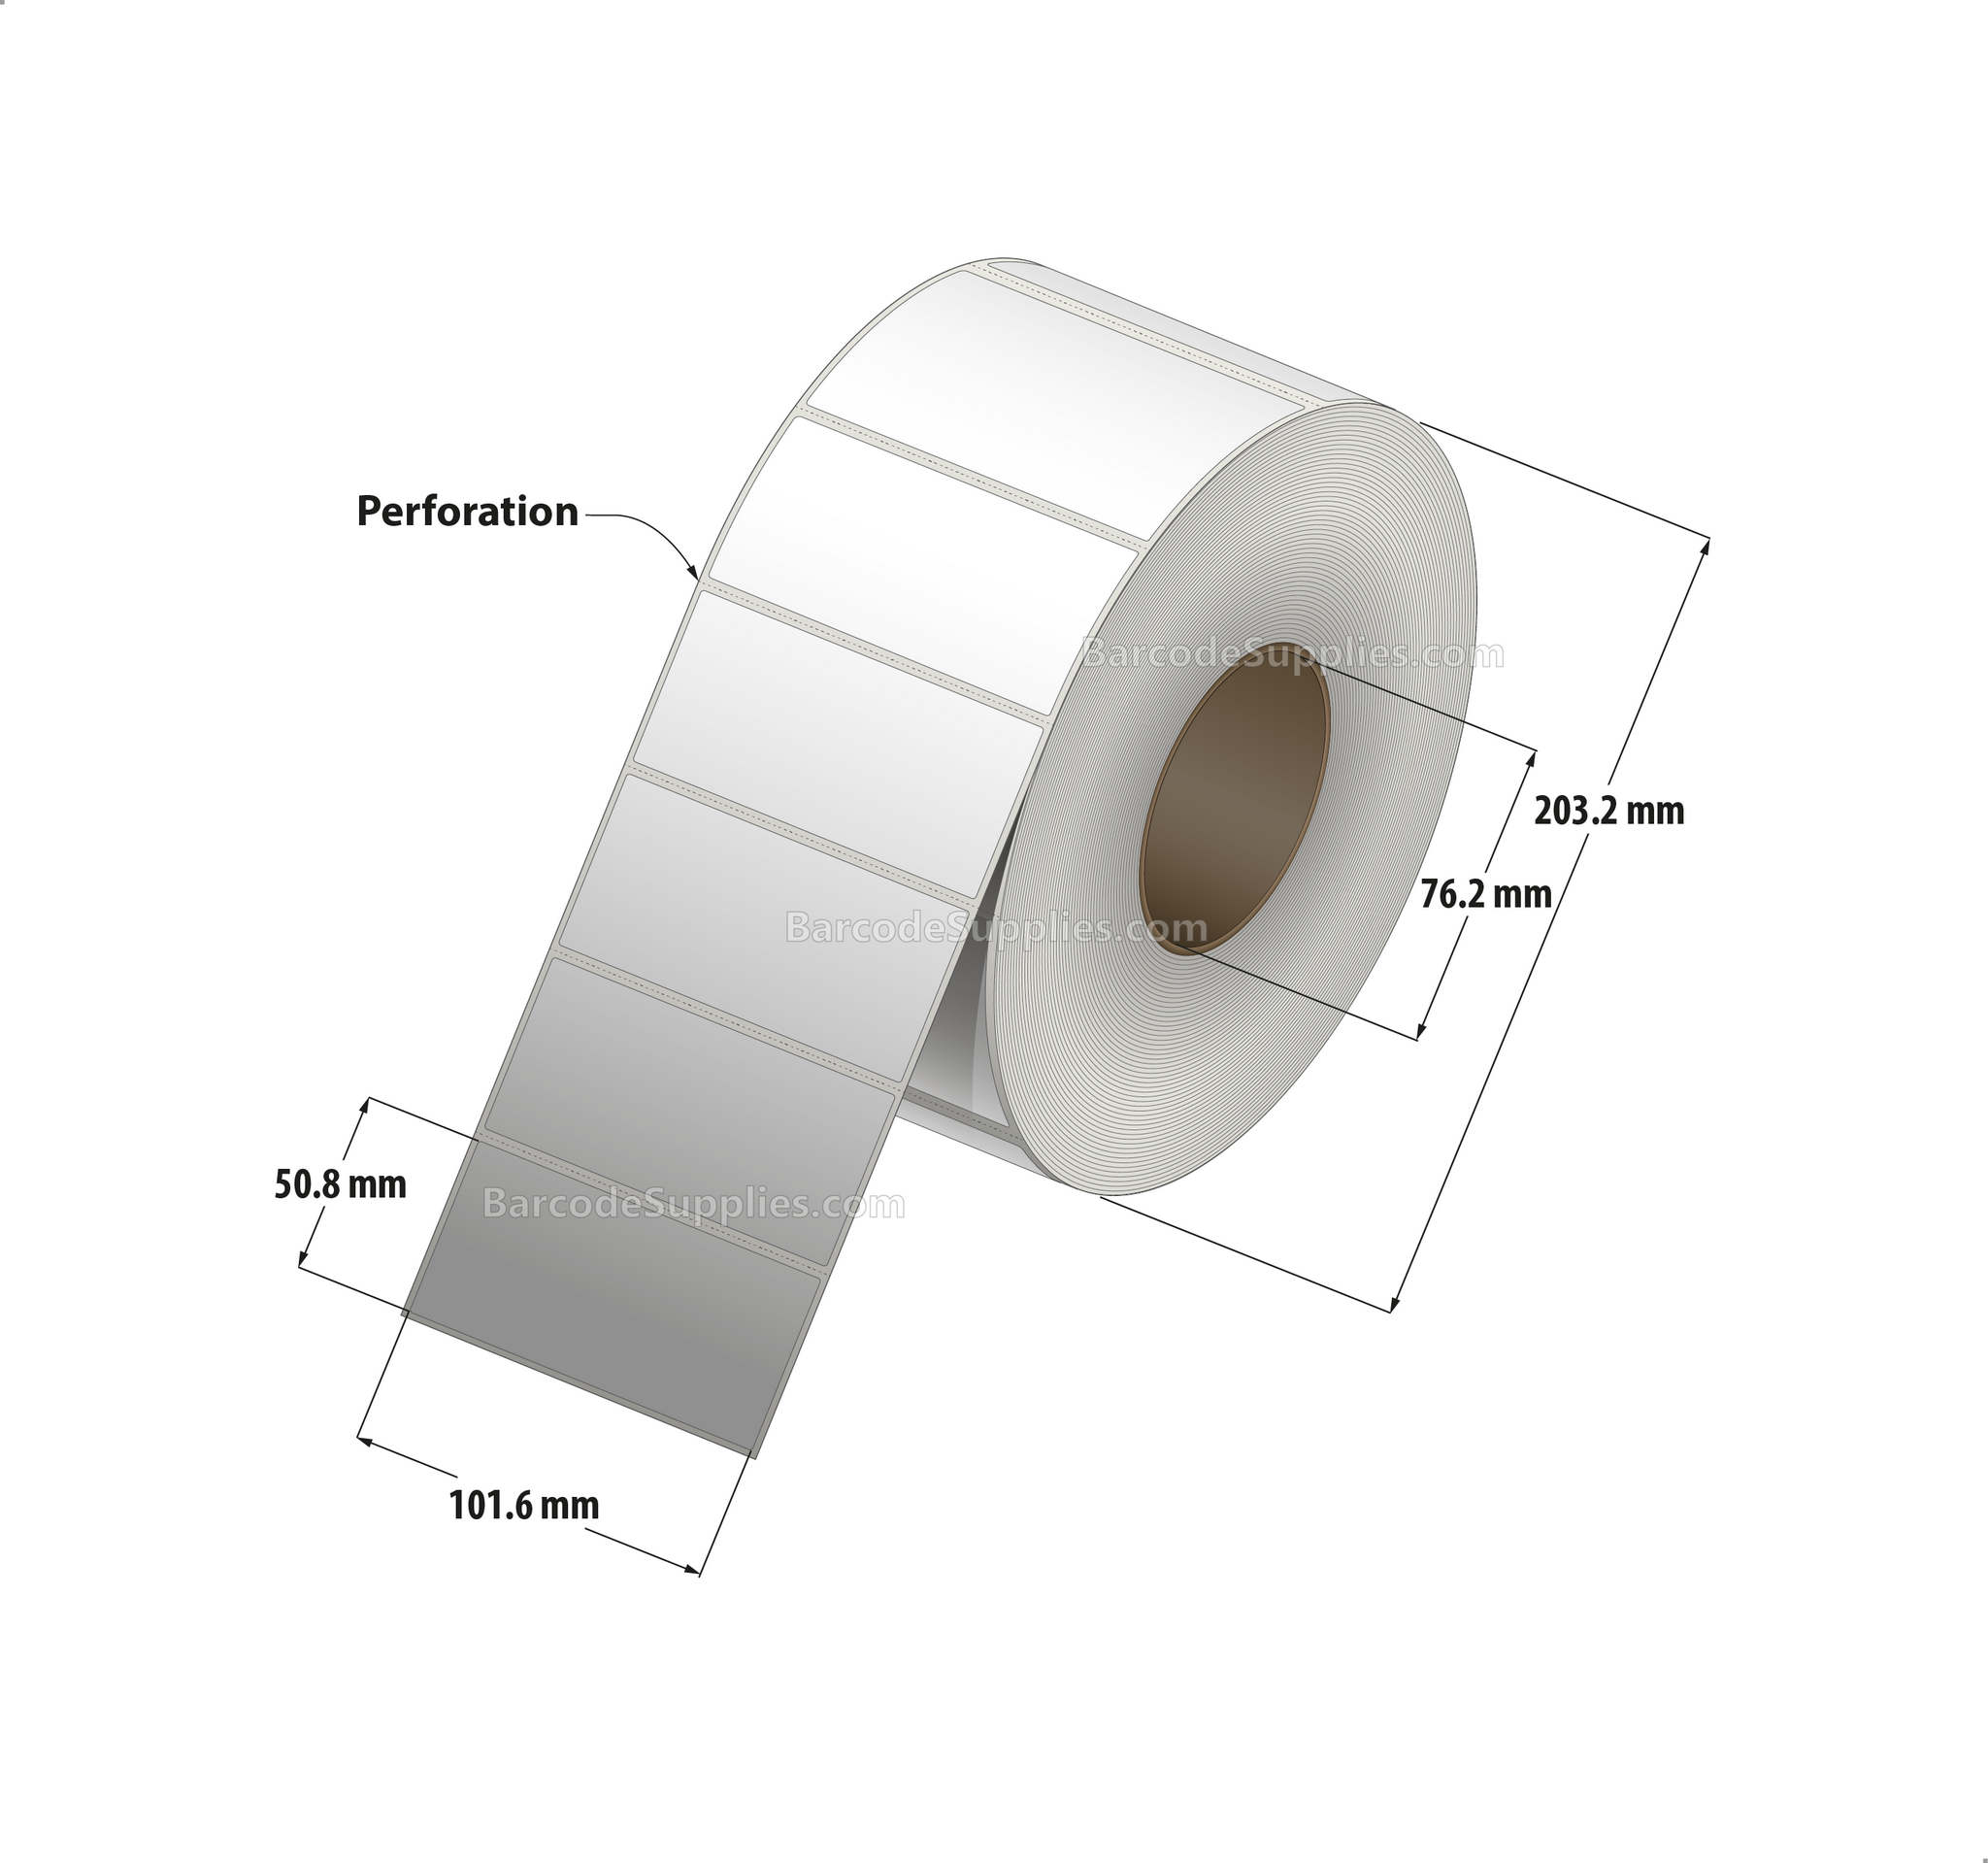 4 x 2 Thermal Transfer White Labels With Permanent Adhesive - Perforated - 2730 Labels Per Roll - Carton Of 4 Rolls - 10920 Labels Total - MPN: RK-4-2-2730-3